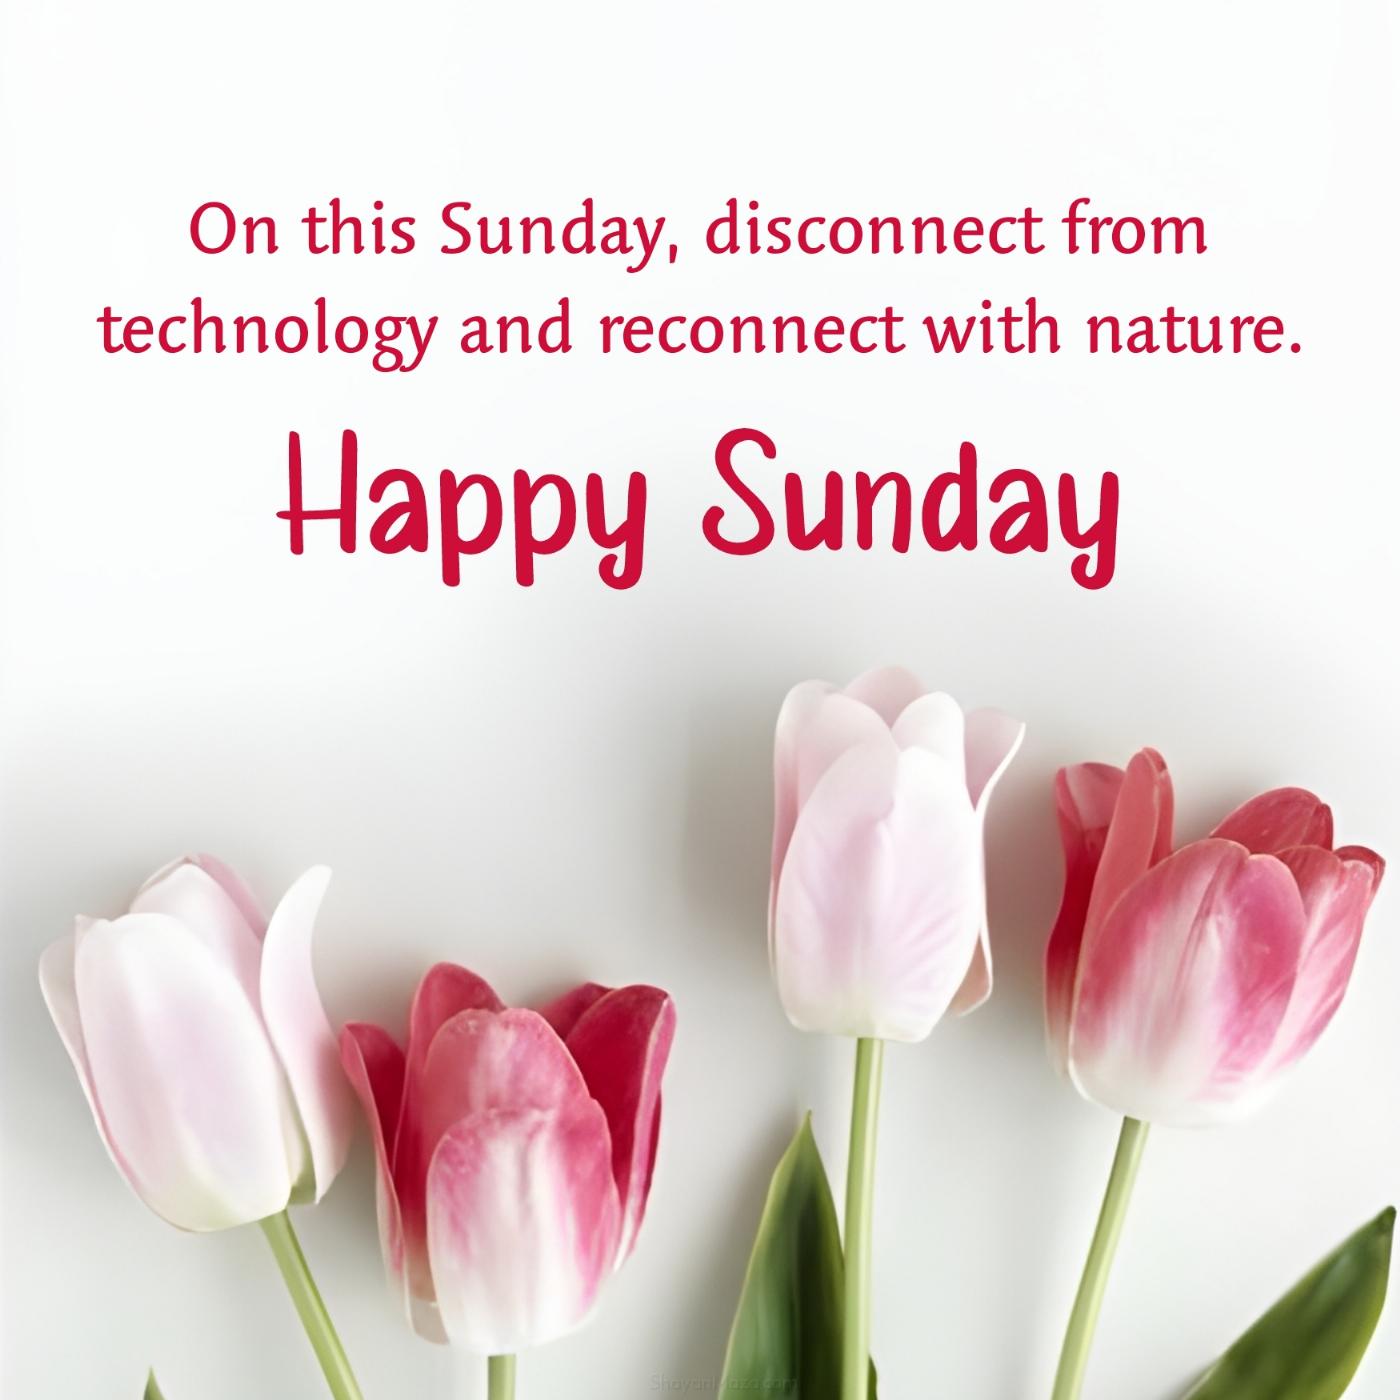 On this Sunday disconnect from technology